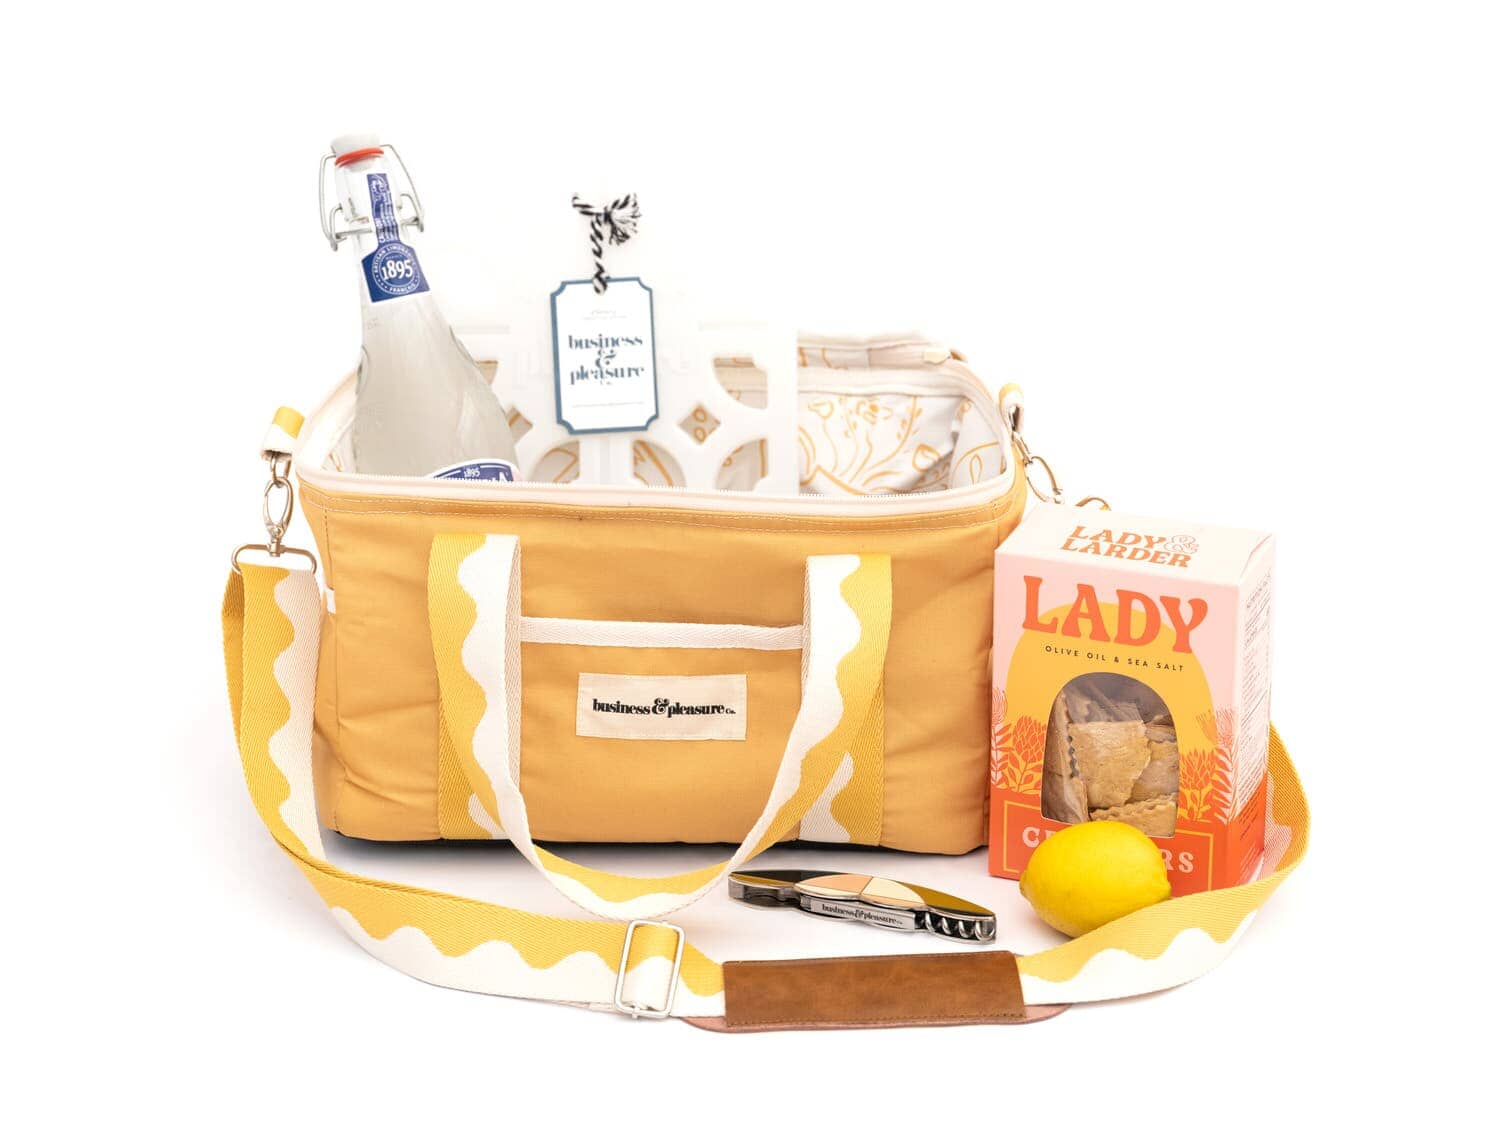 Studio image of riviera mimosa cooler bag with drinks and snacks